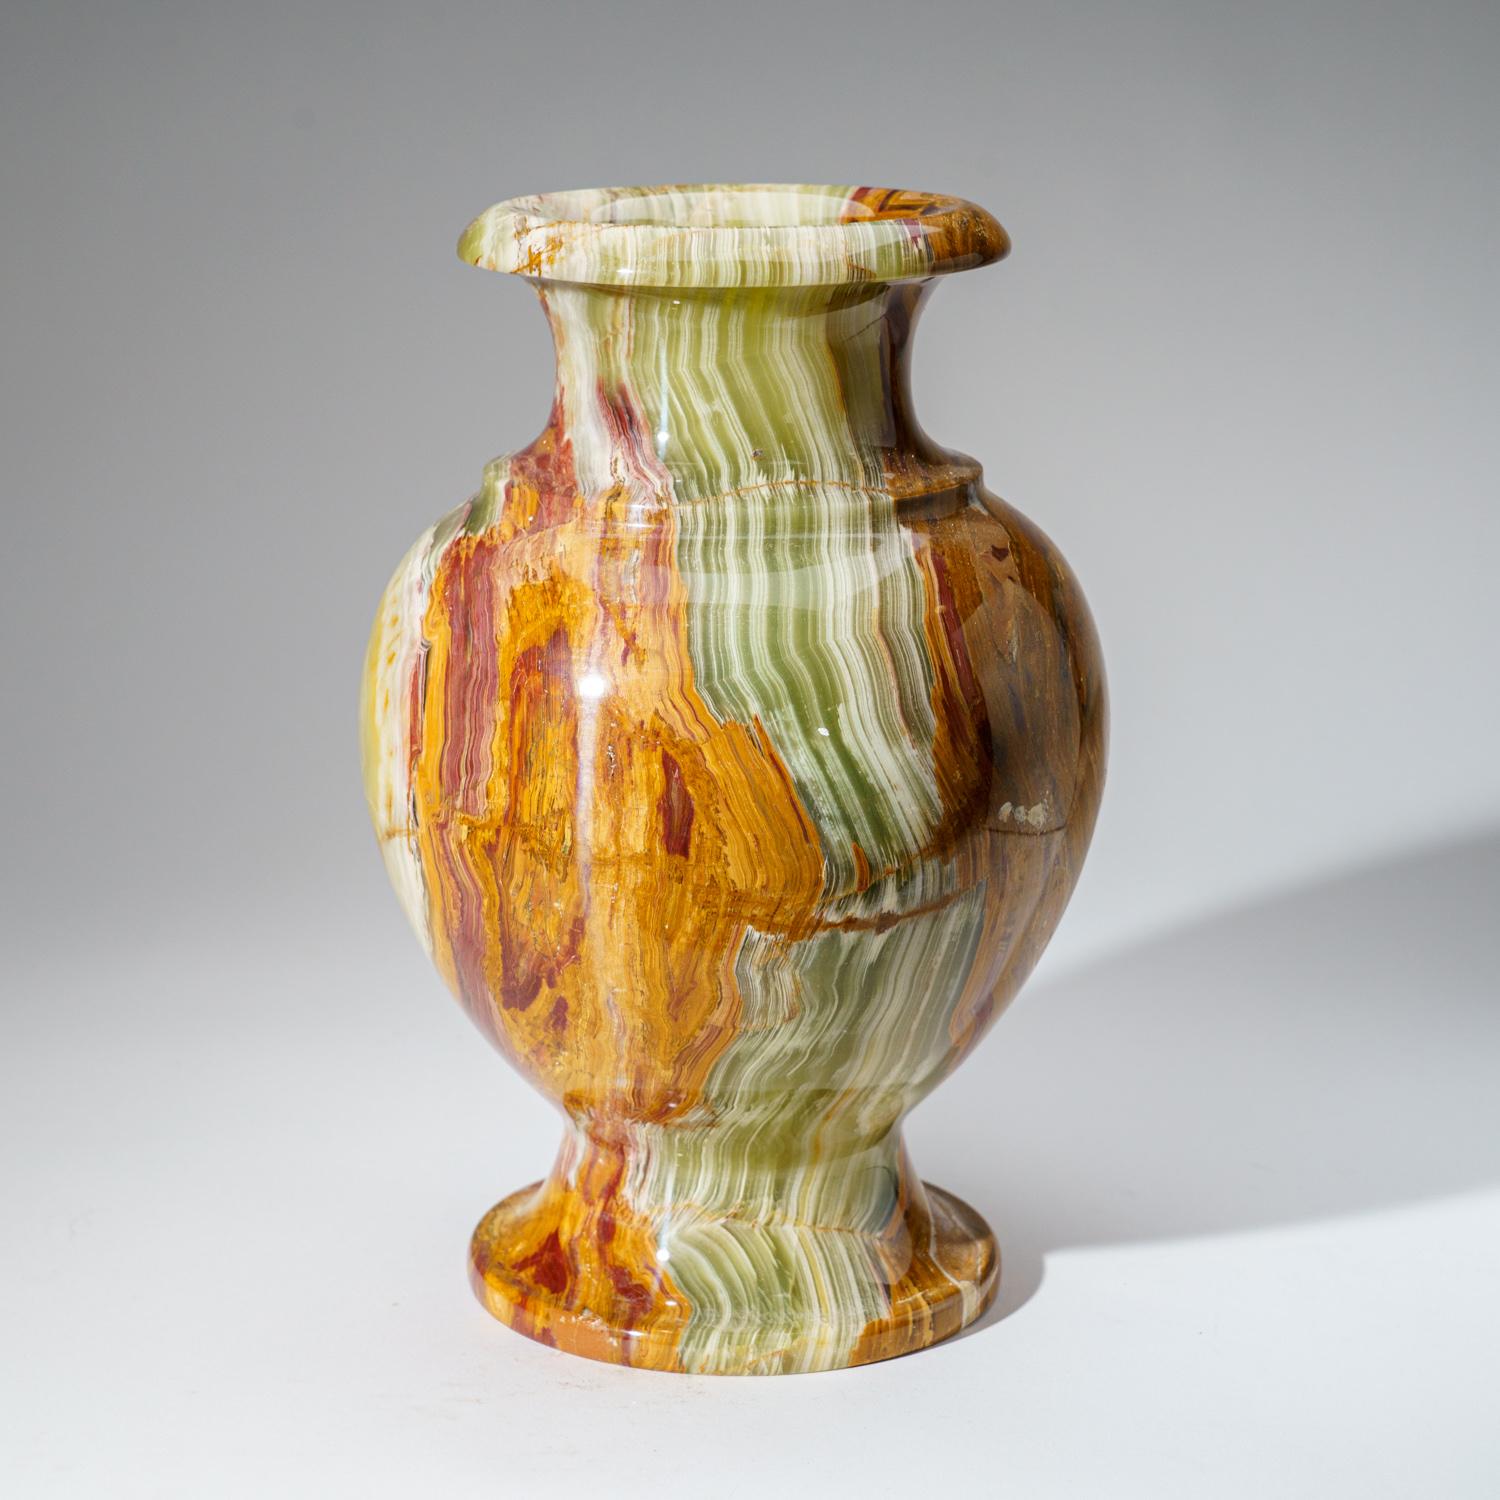 This polished onyx flower vase from Mexico adds a touch of timeless elegance to any space. Handcrafted from a single block of natural onyx, its distinctive translucent tones and grounding properties make it a unique and captivating piece.Its